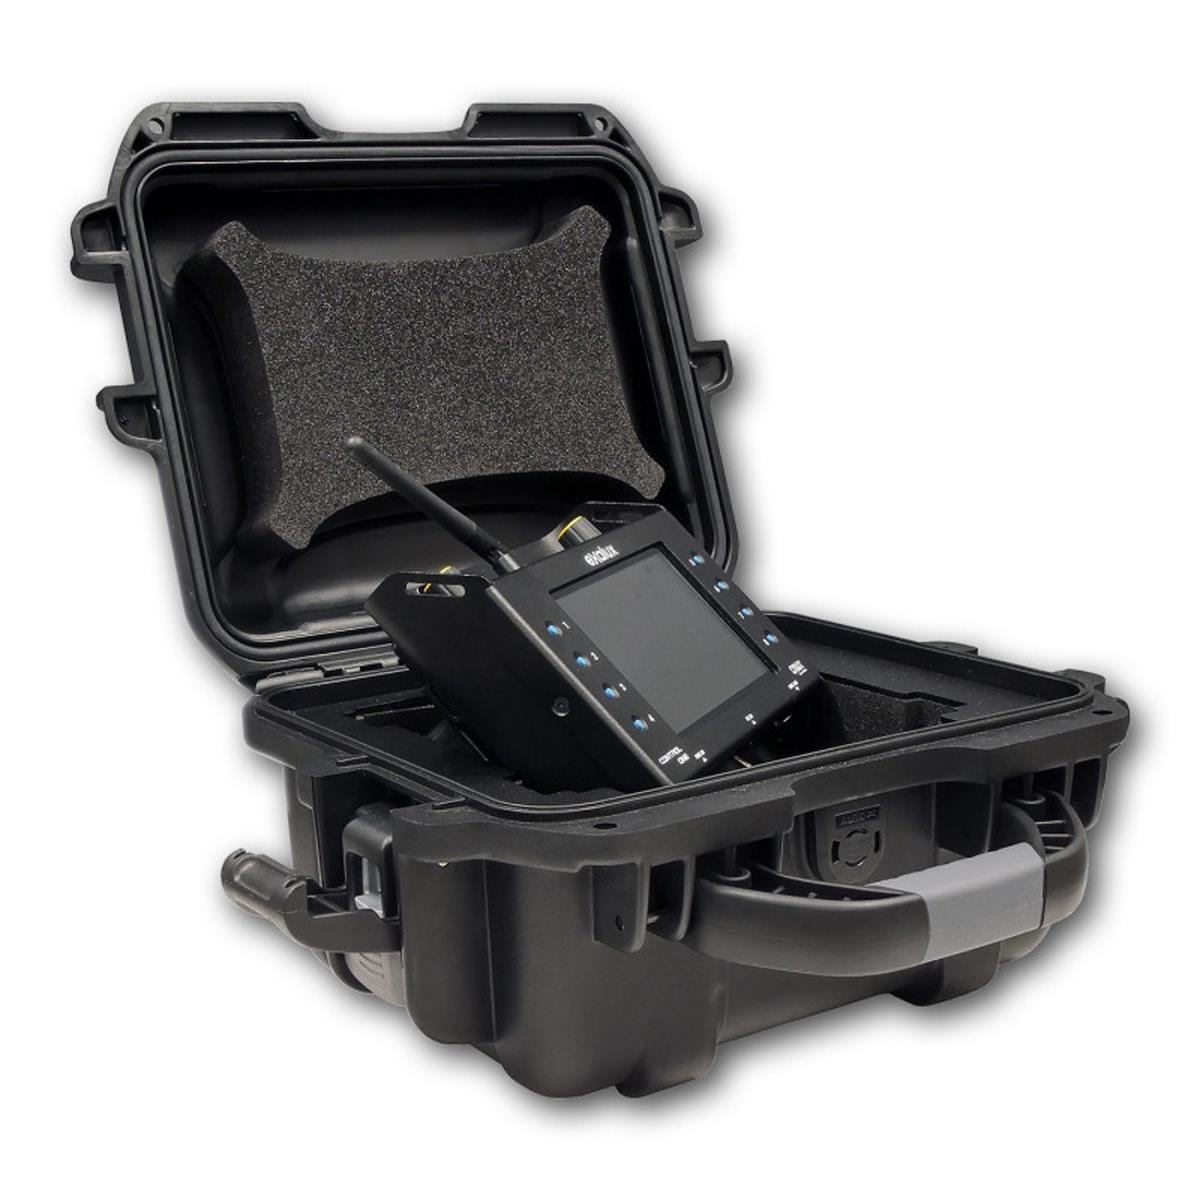 Image of Exalux CONTROL ONE All-In-One Wireless DMX Controller Rental Kit